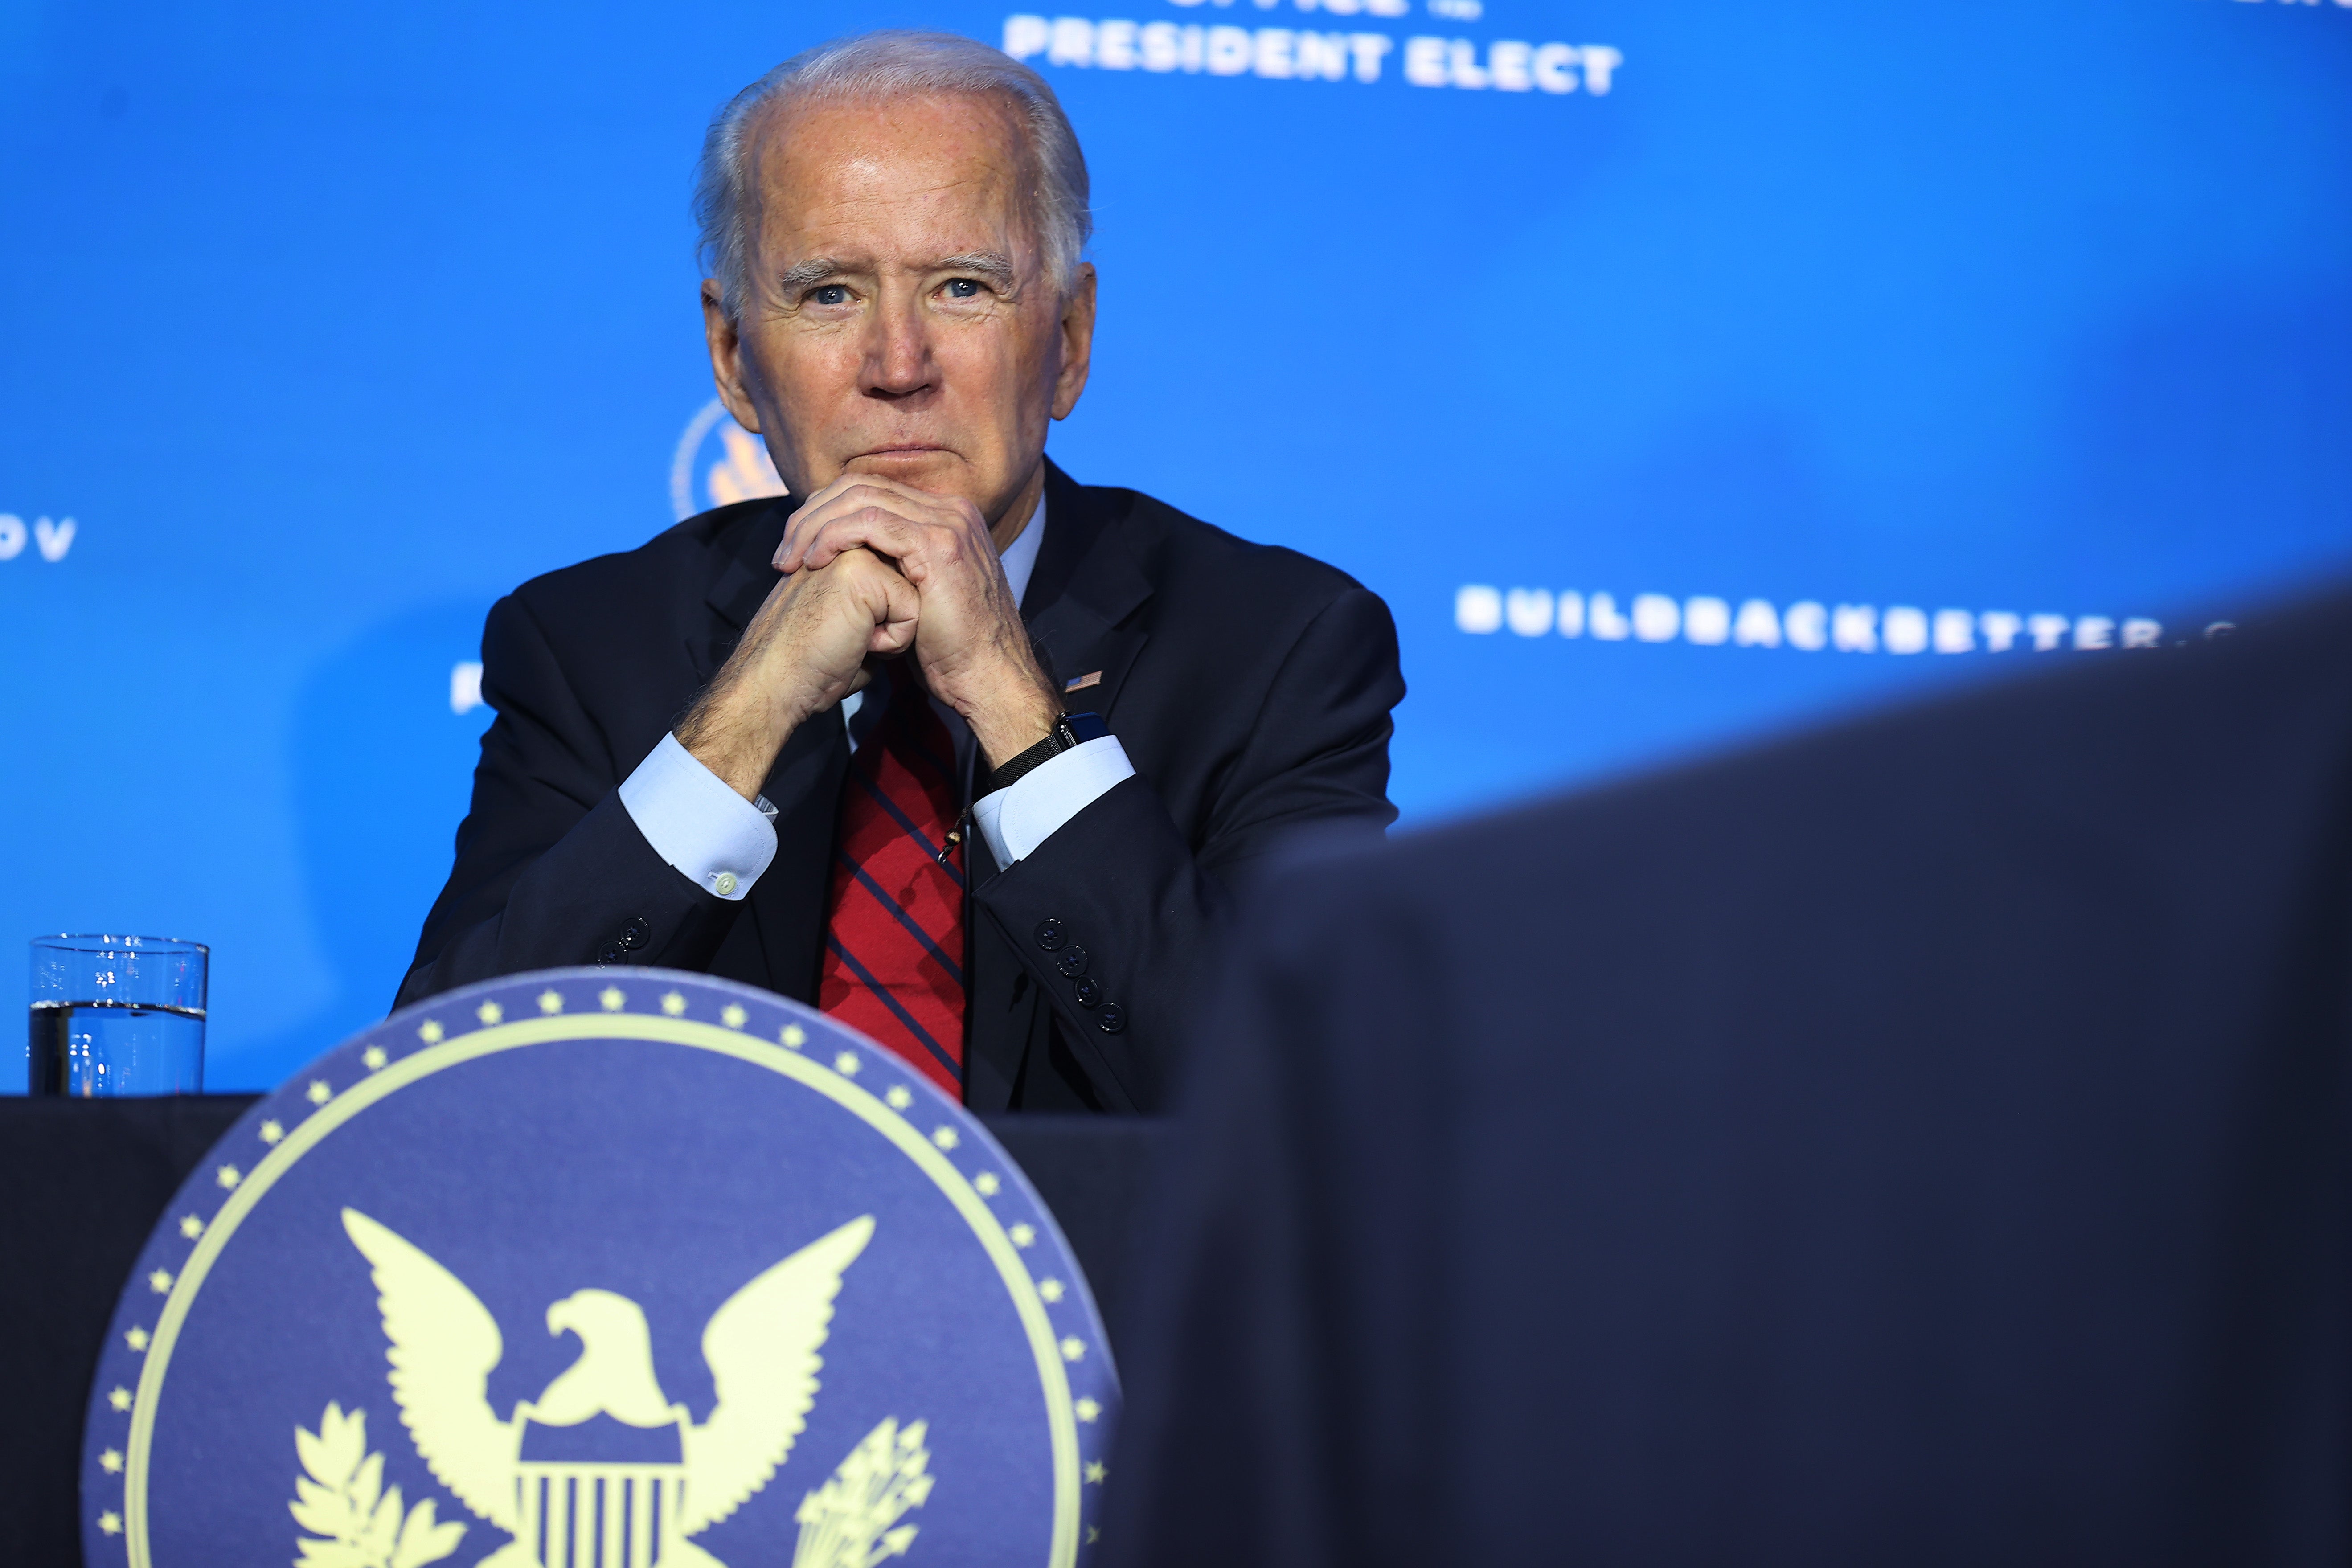 President-elect Joe Biden attends announcement of members of his health team, including his pick for secretary of Health and Human Services Xavier Becerra, at the Queen Theatre on 8 December 2020 in Wilmington, Delaware